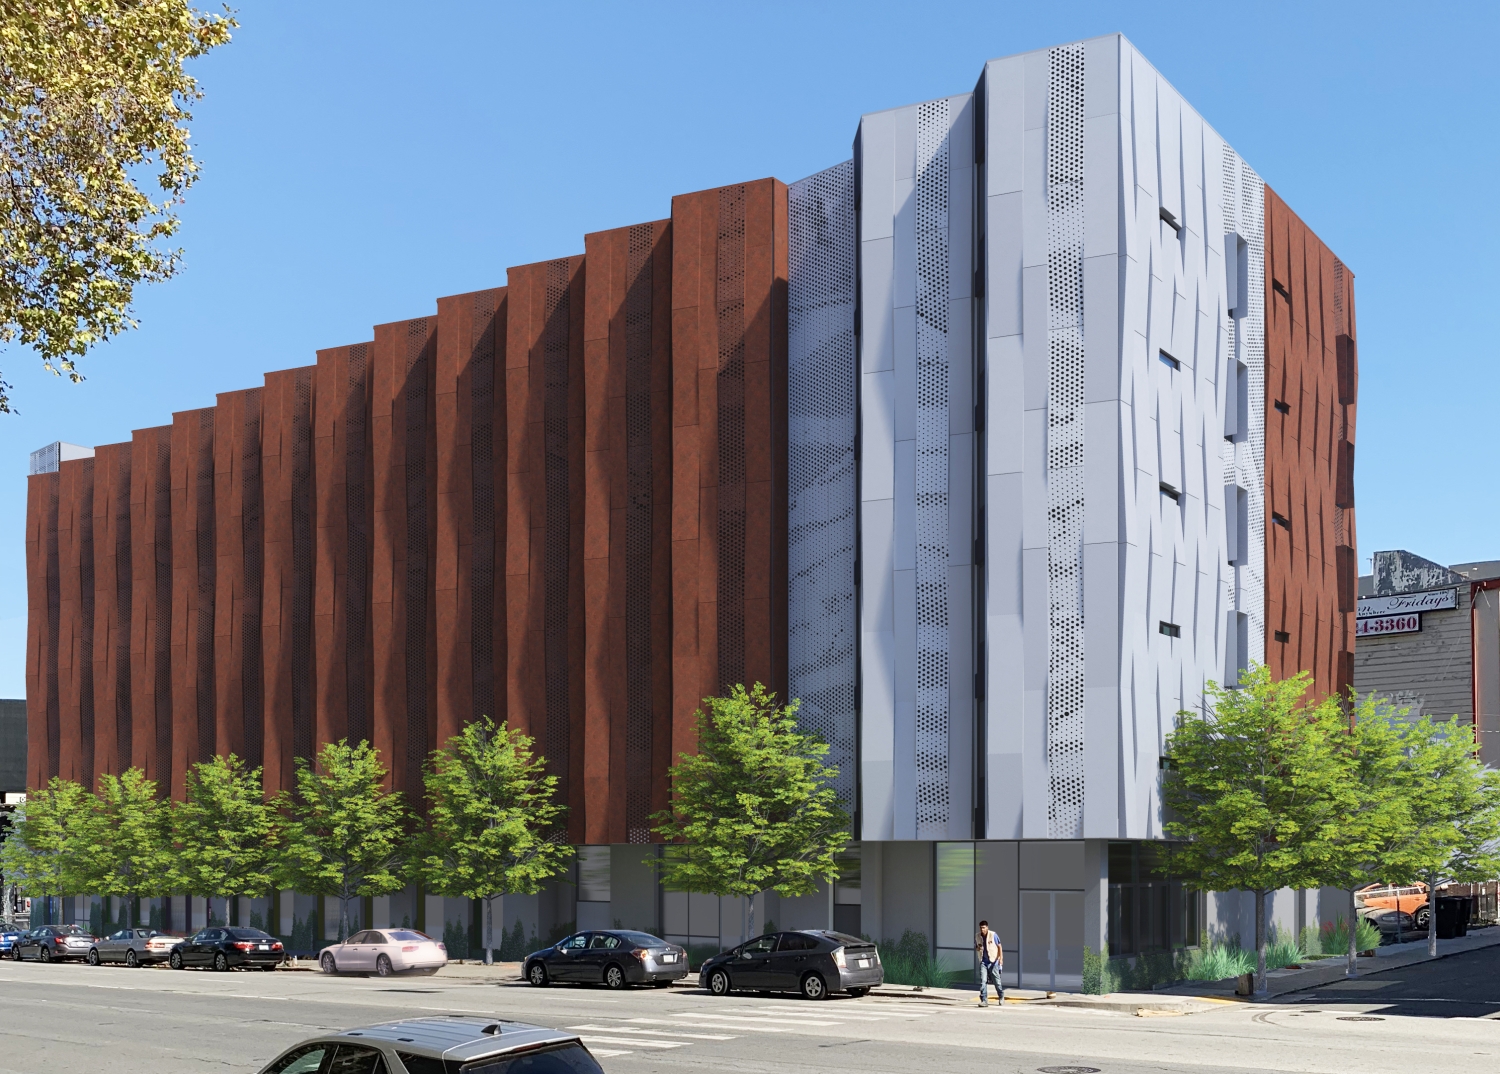 Rendering of exterior for Tahanan Supportive Housing in San Francisco.